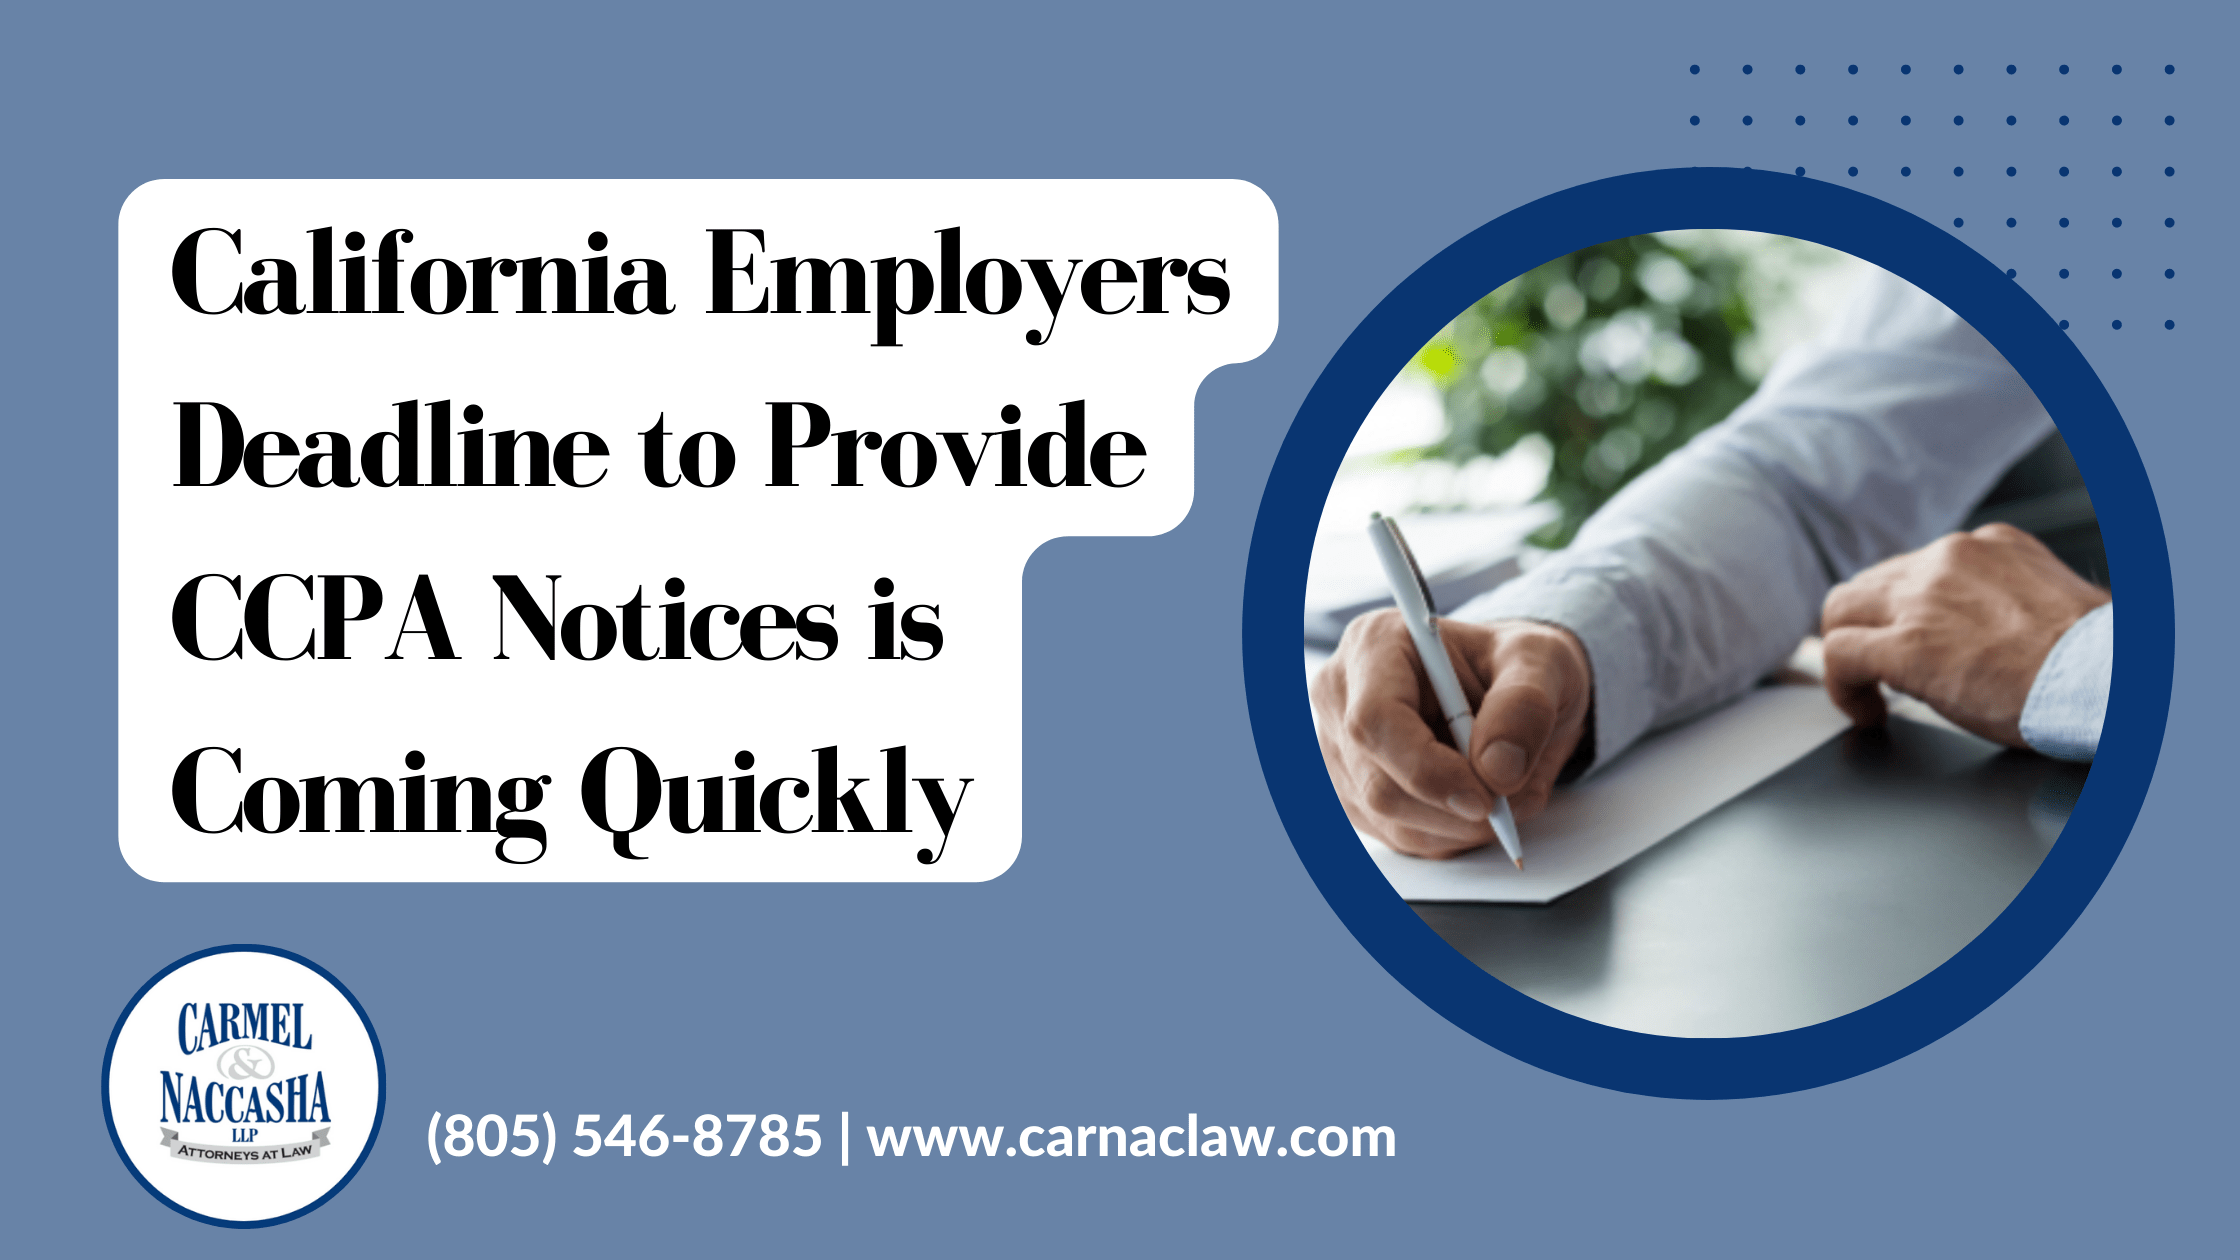 California Employers Deadline to Provide CCPA Notices is Coming Quickly